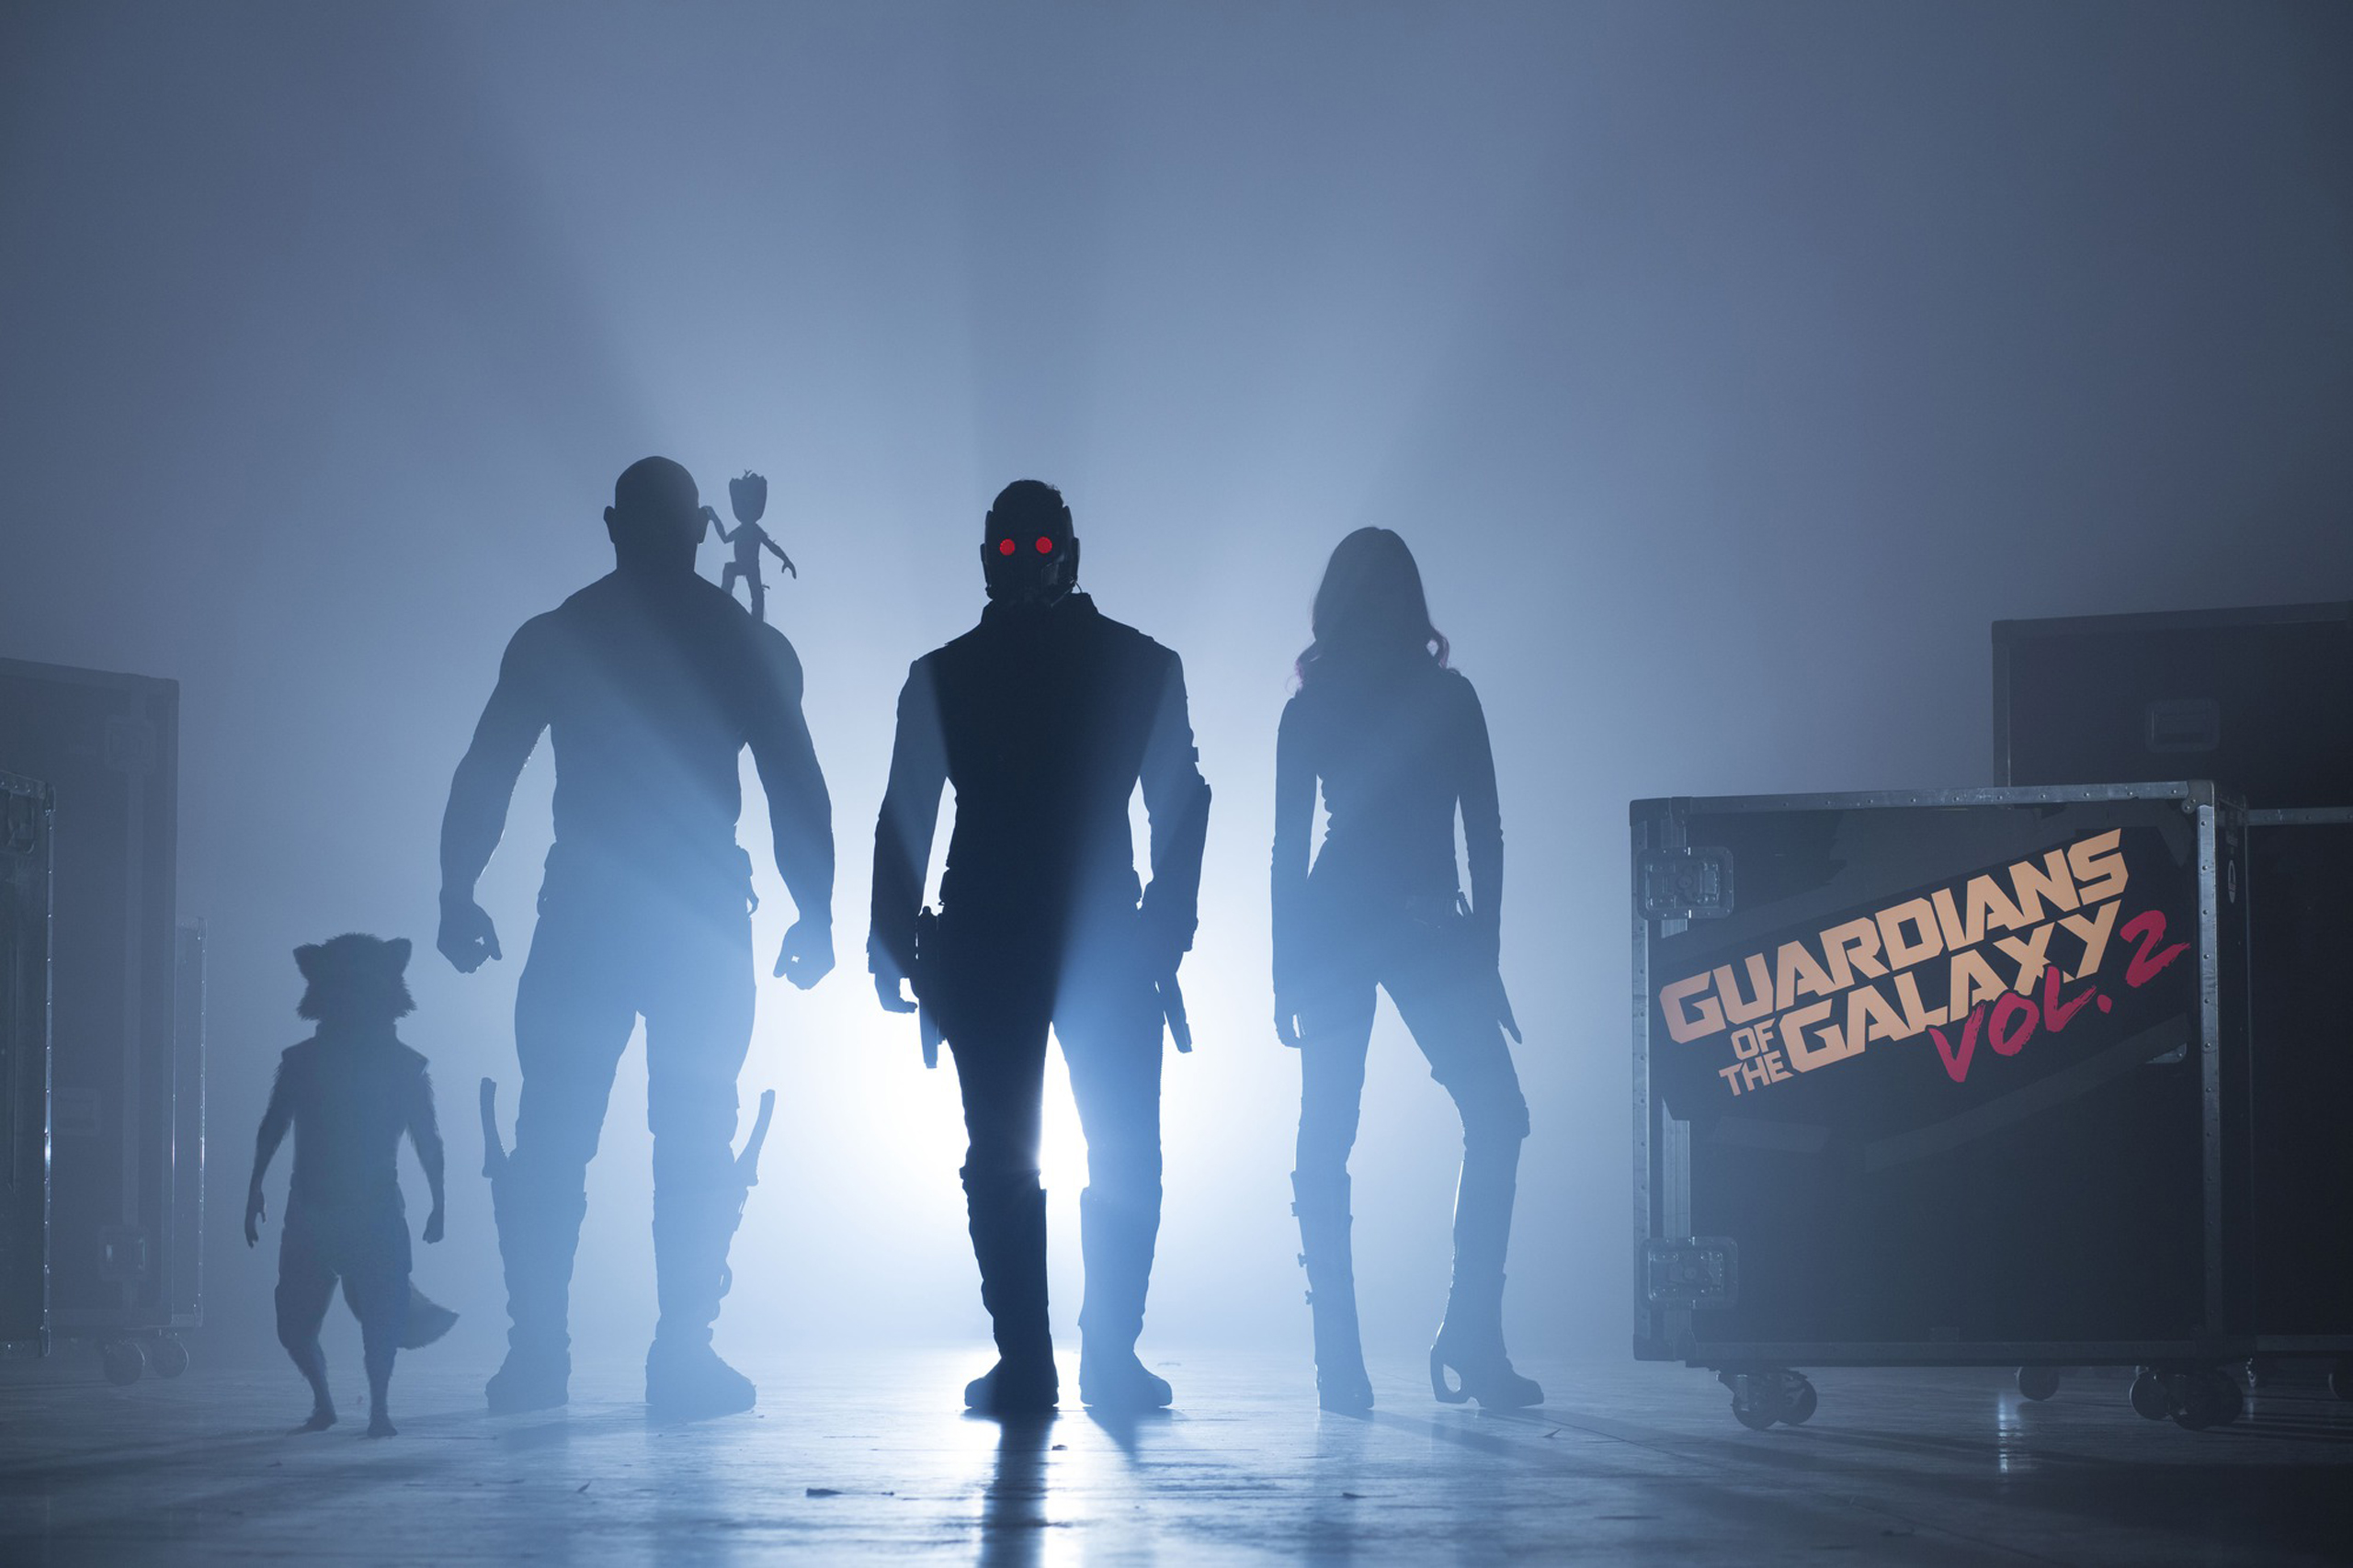 Guardians Of The Galaxy Vol. 2
                      
                      Start of Production Image
                      
                      L to R: Rocket (voiced by Bradley Cooper), Drax (Dave Bautista), Groot (voiced by Vin Diesel), Peter Quill/Star-Lord (Chris Pratt) and Gamora (Zoe Saldana)
                      
                      ©Marvel 2017 (Disney/ Marvel Studios)